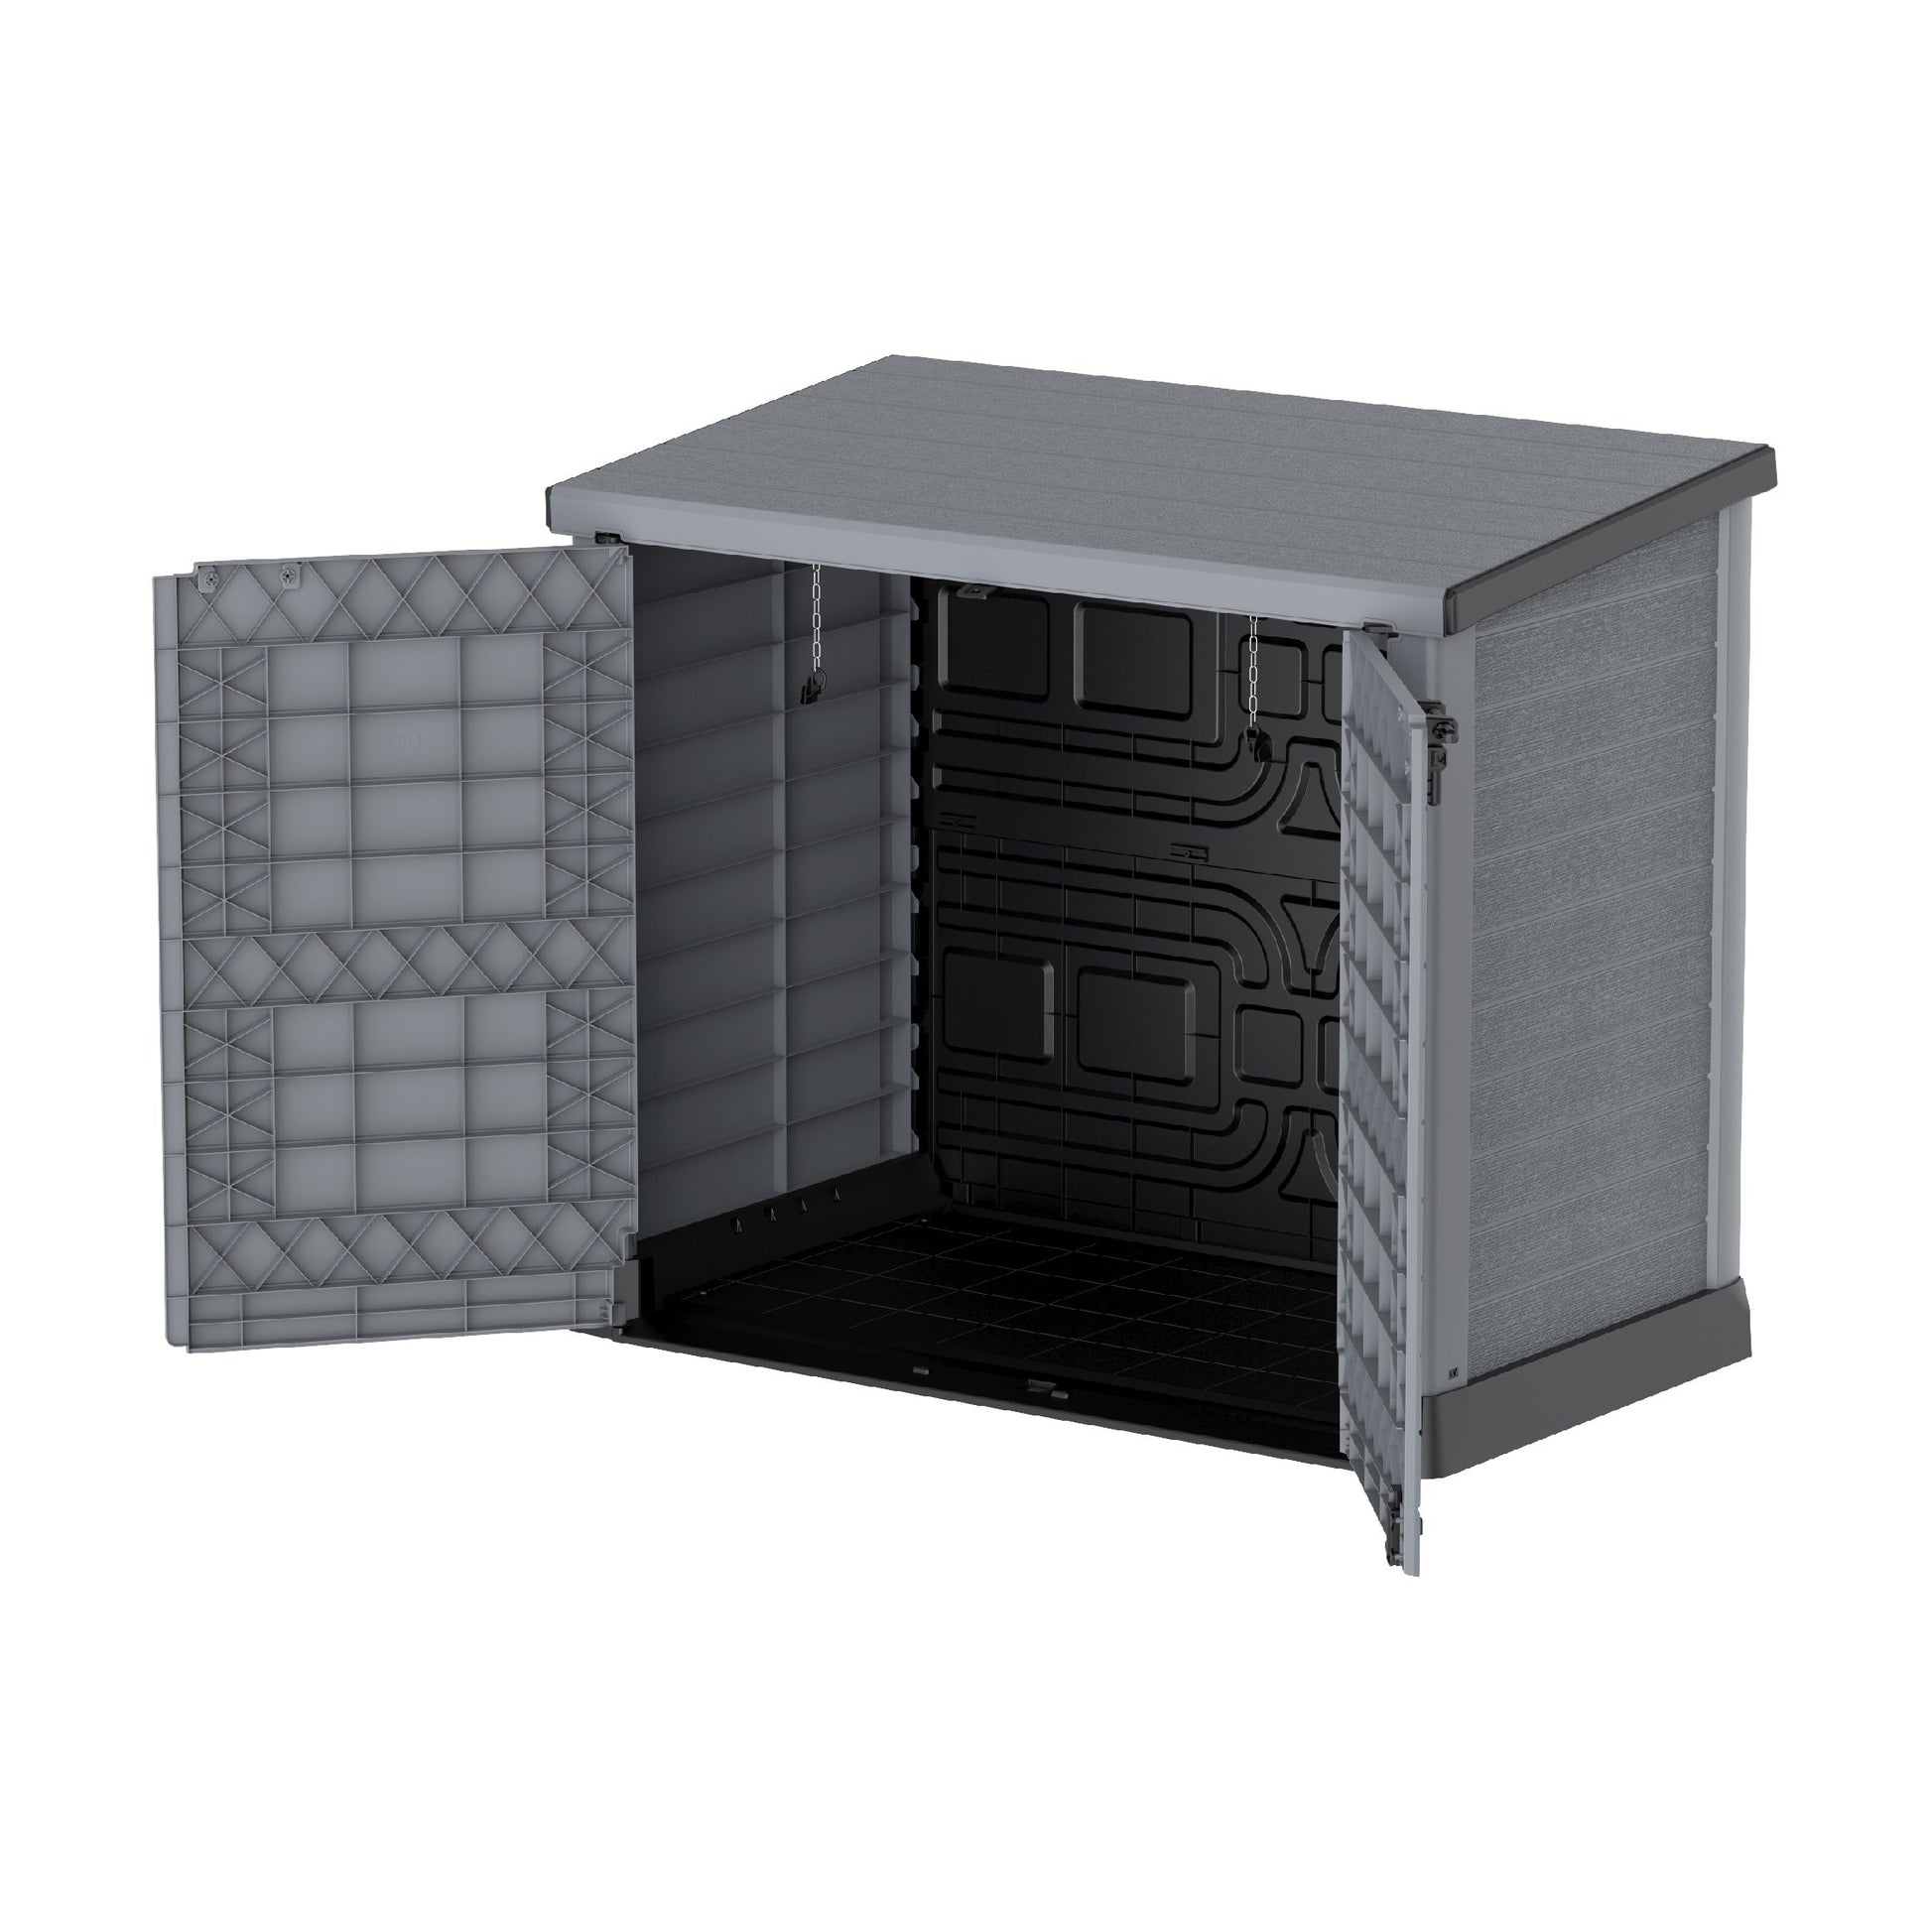 1200L Small Outdoor Storage Shed